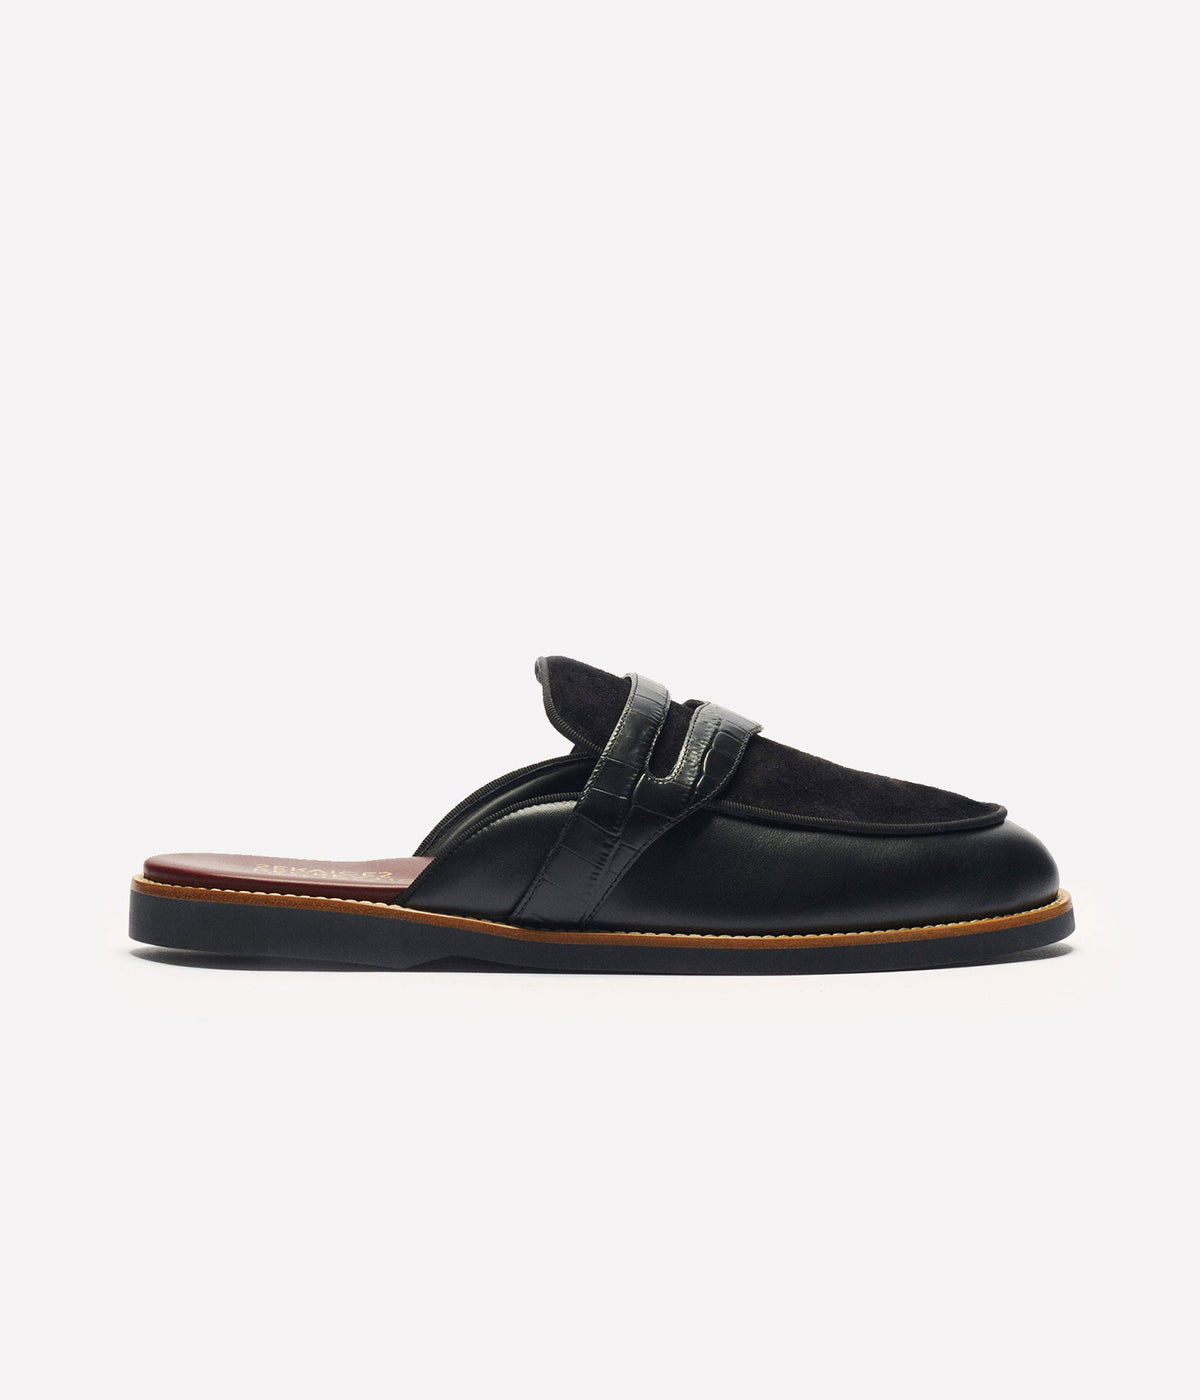 HUMAN RECREATIONAL SERVICES PALAZZO SLIPPER IN BLACK MADE WITH ITALIAN CALF SKIN